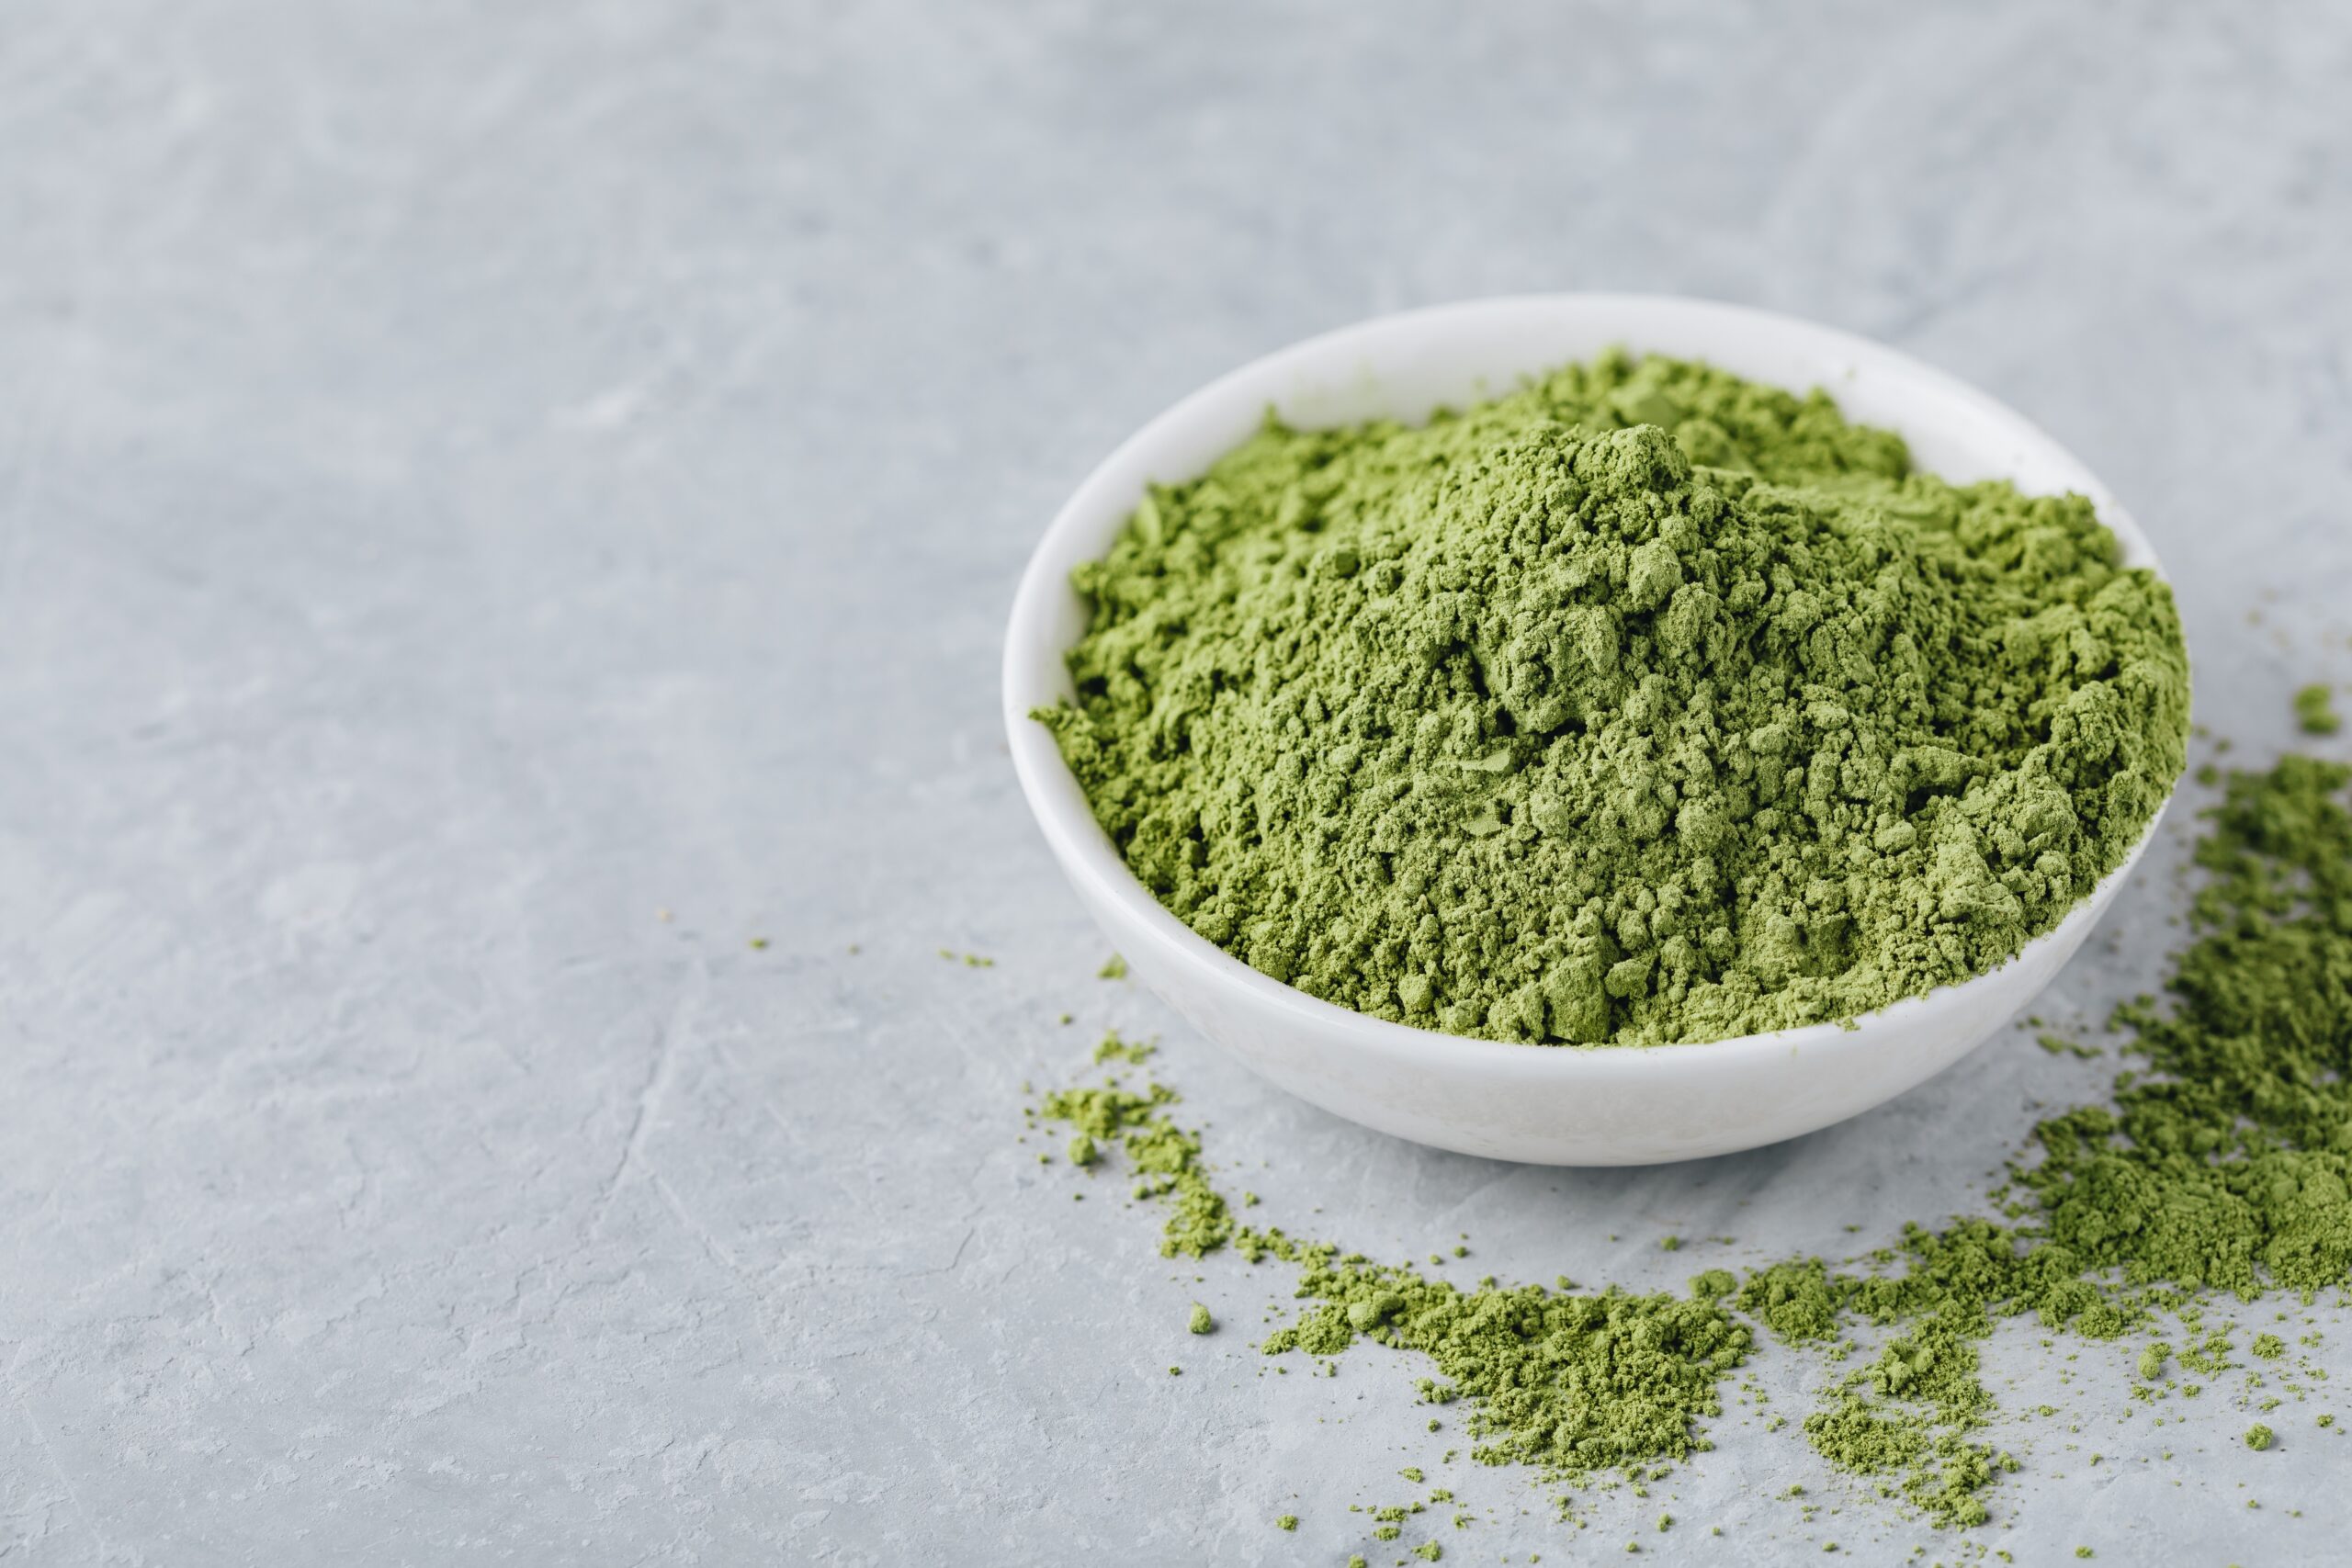 What Are Super Greens & Why Are They So Popular?